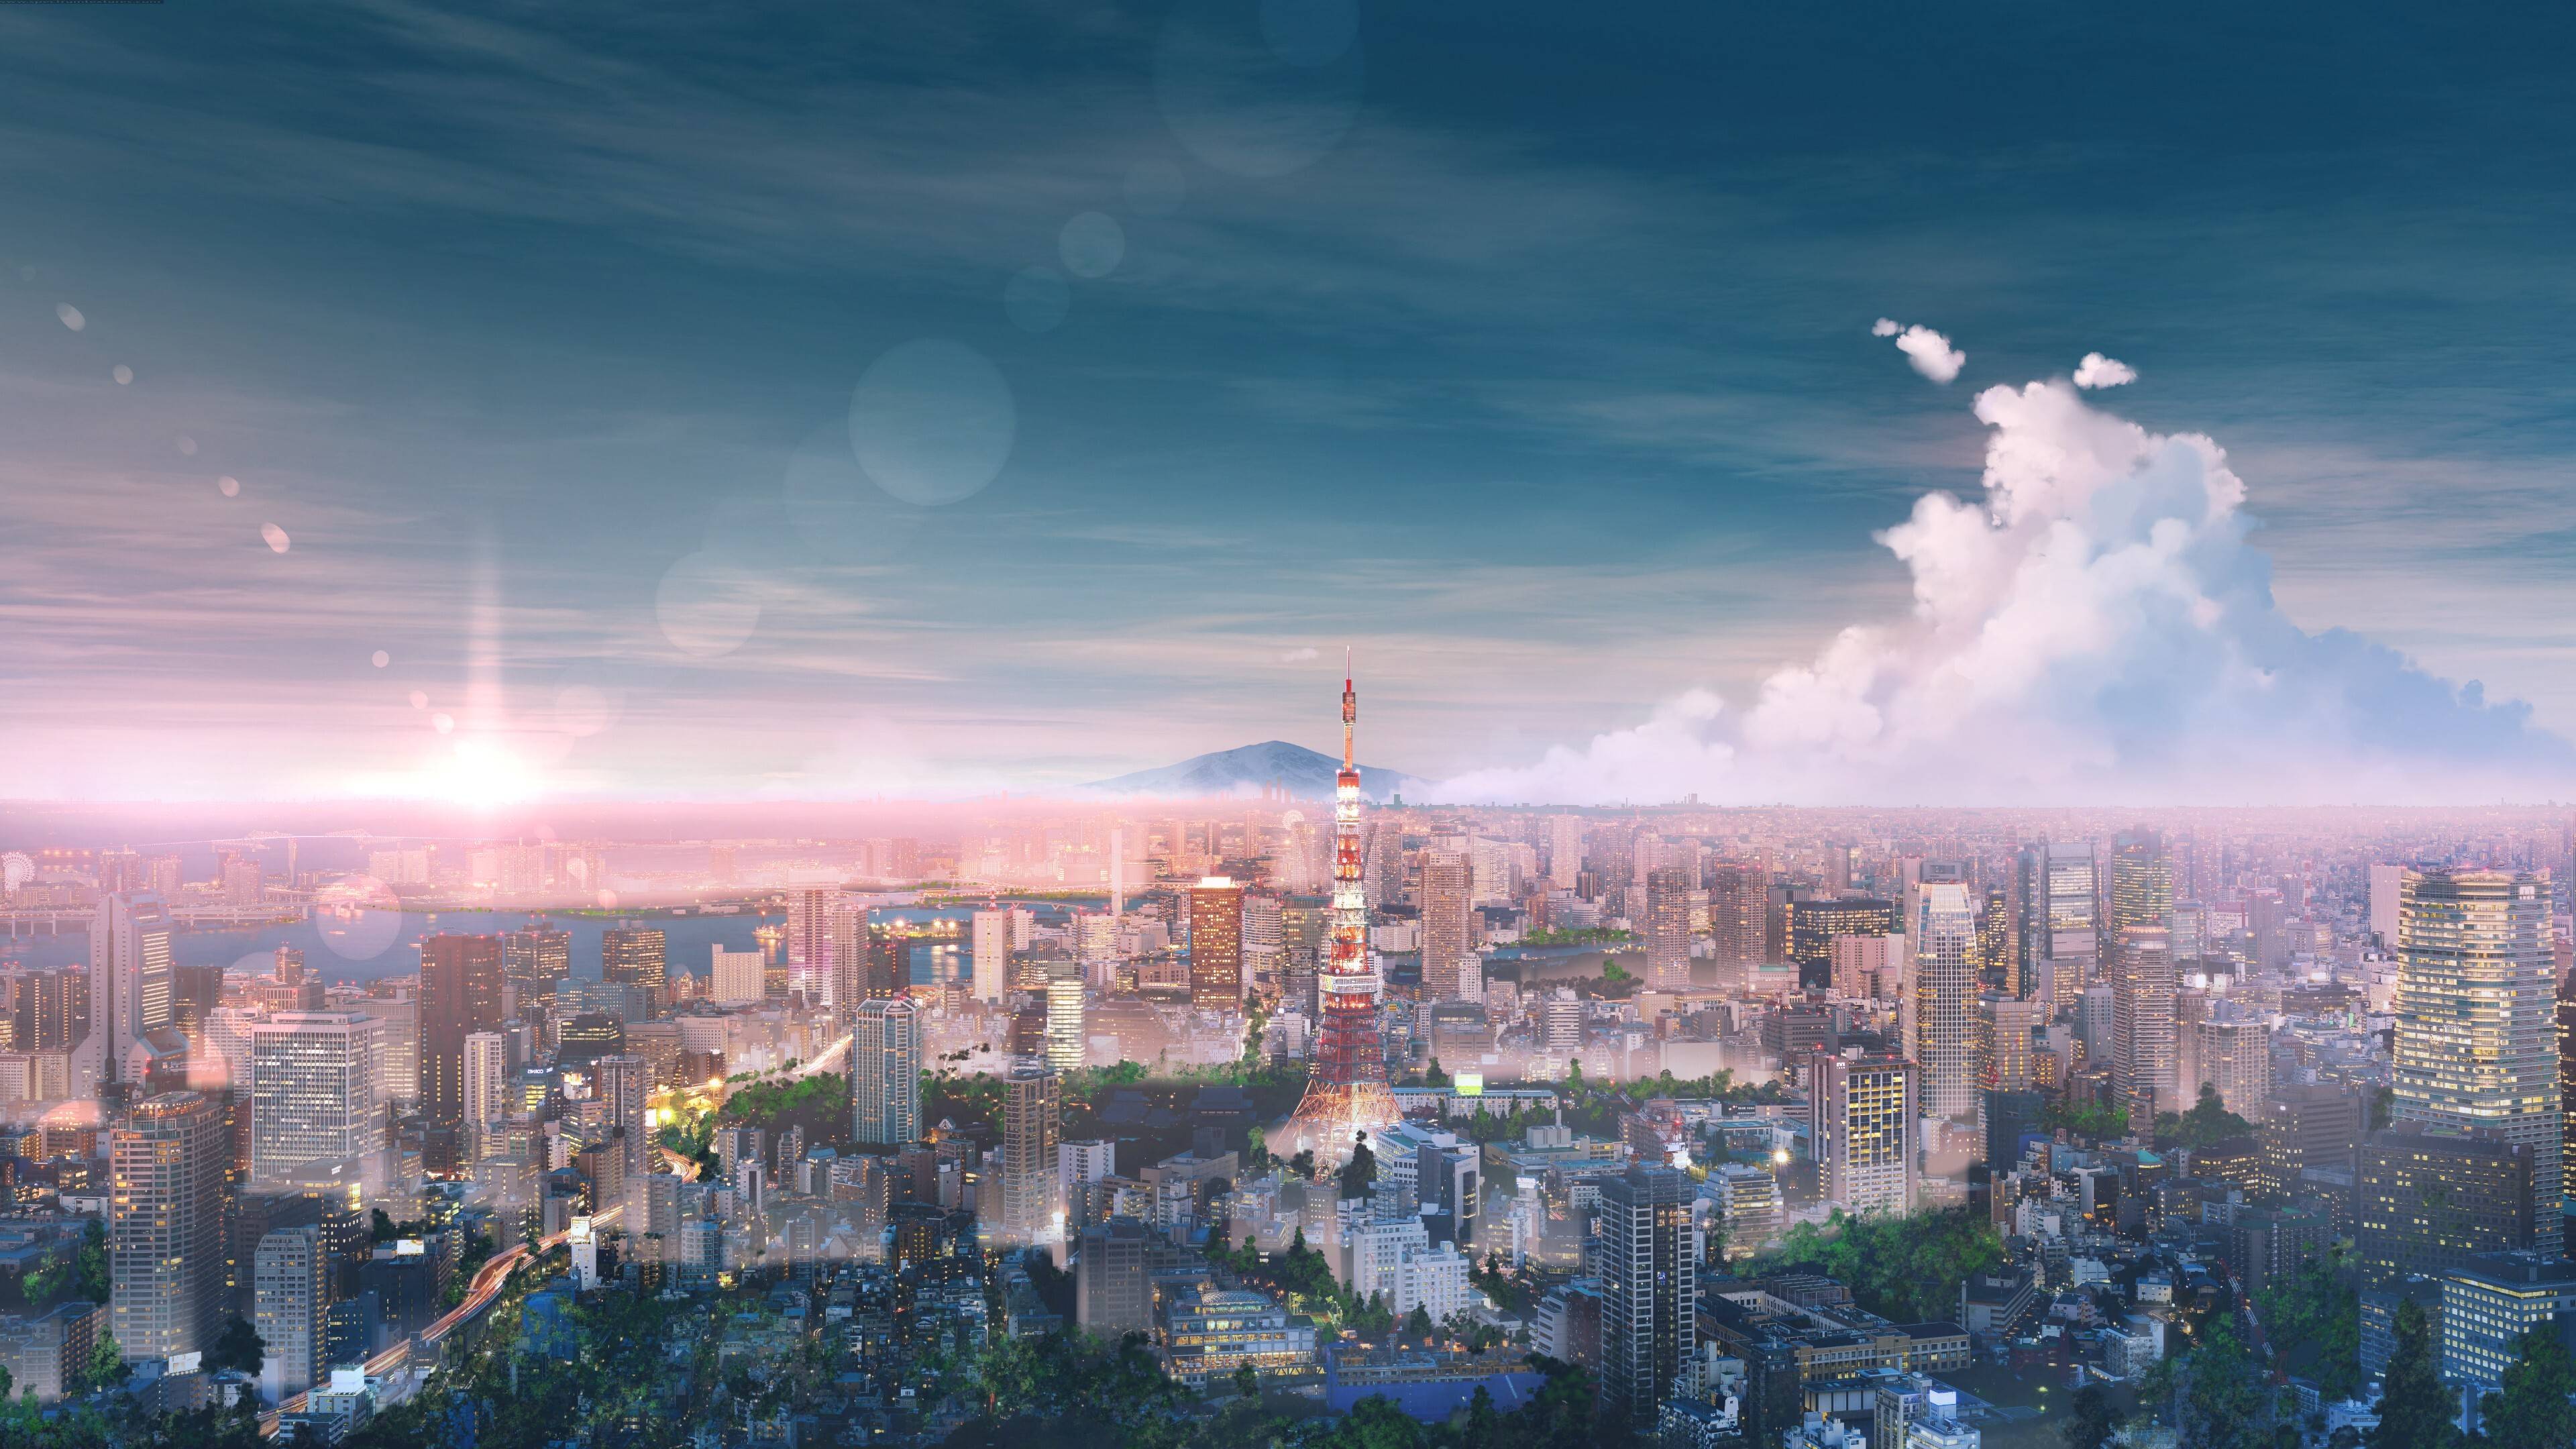 Tokyo, the capital city of Japan, is a bustling metropolis that is home to over 13 million people. - Cityscape, Tokyo